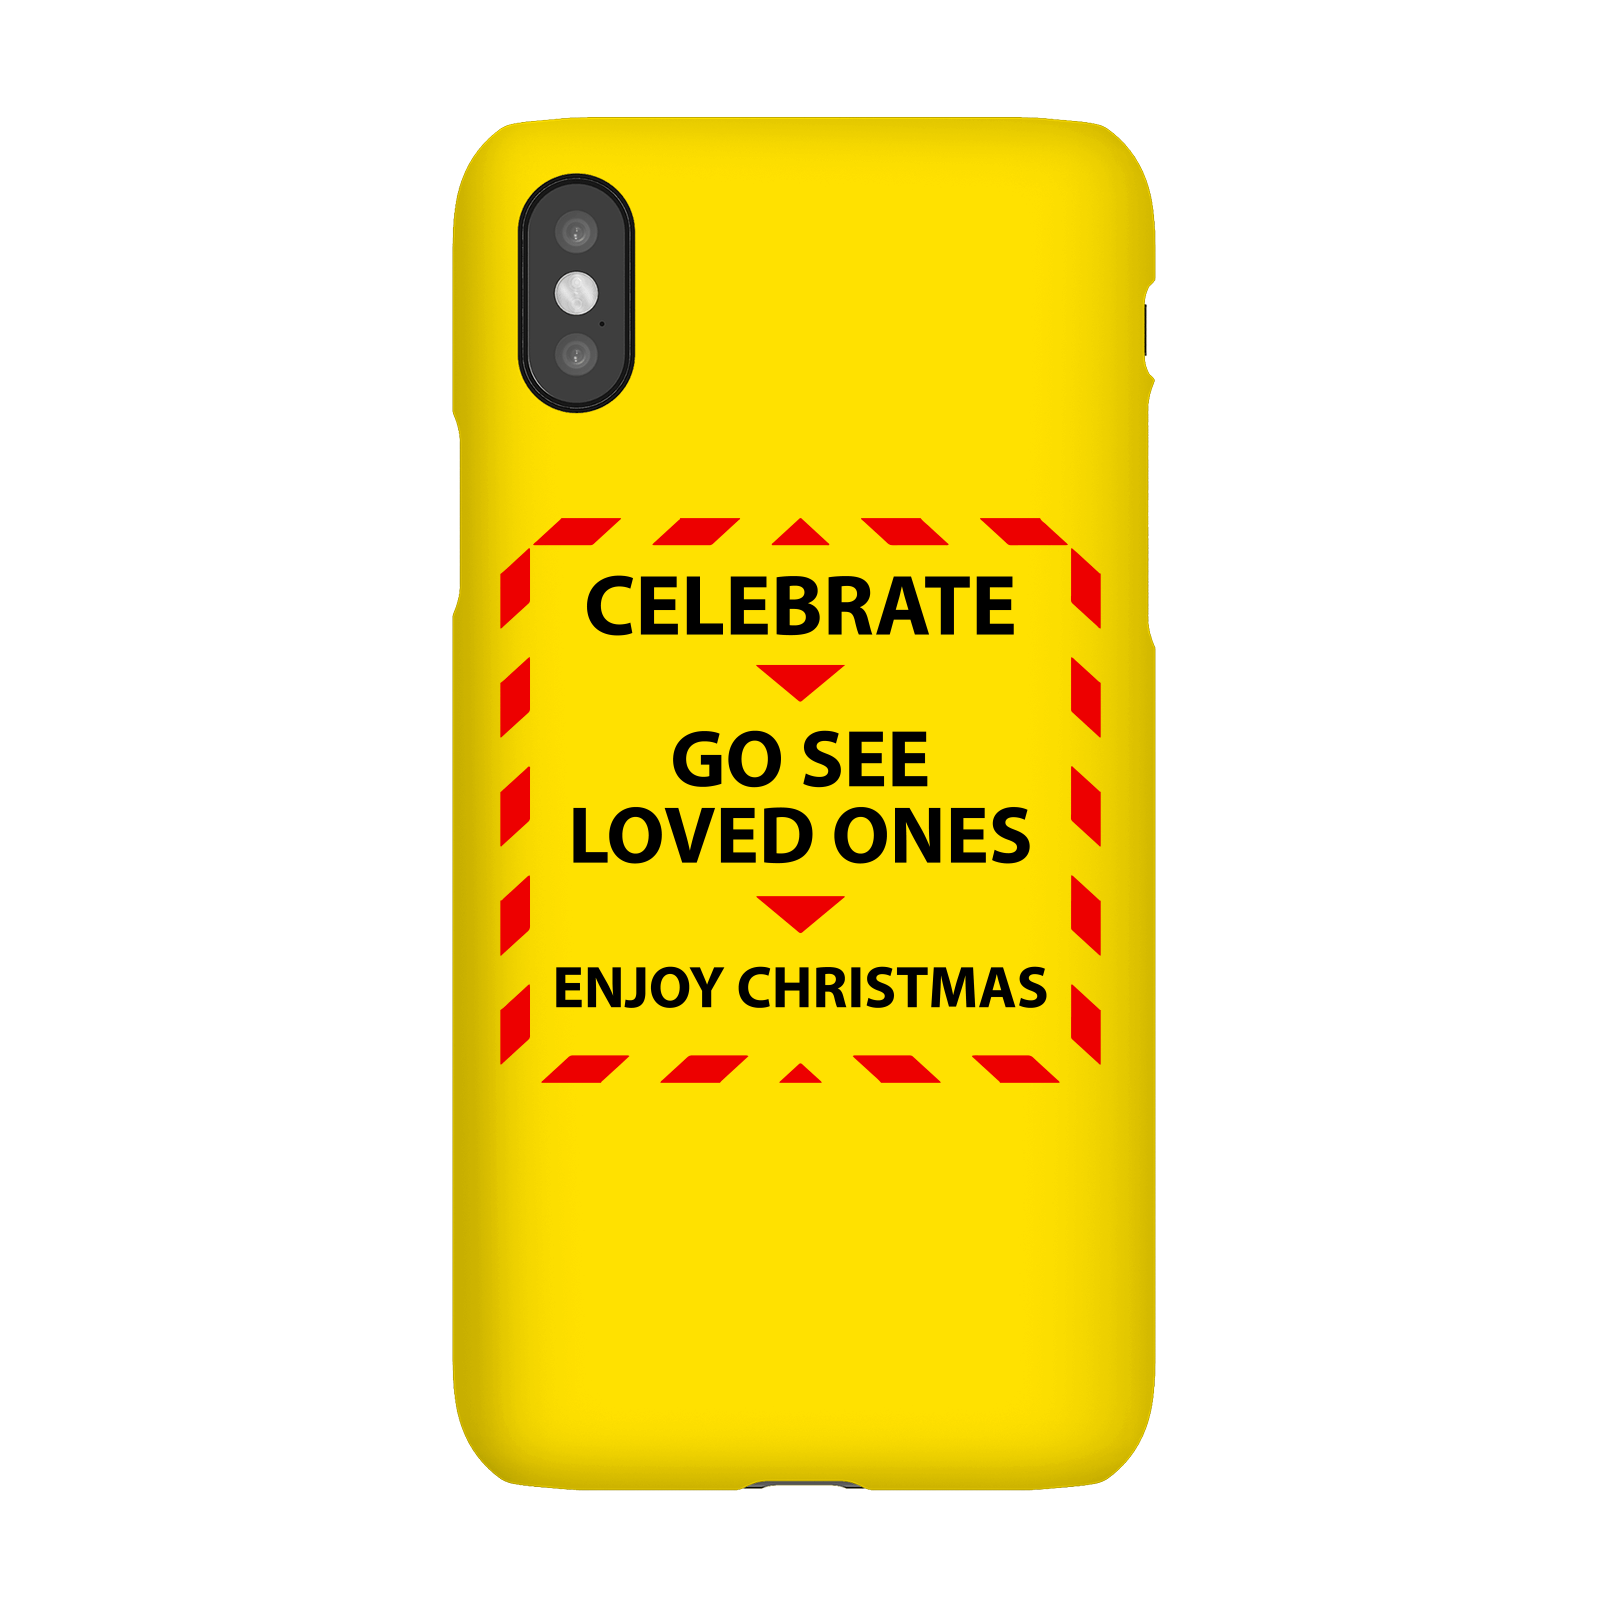 Enjoy Christmas 2021 Phone Case for iPhone and Android - iPhone 5/5s - Snap Case - Matte